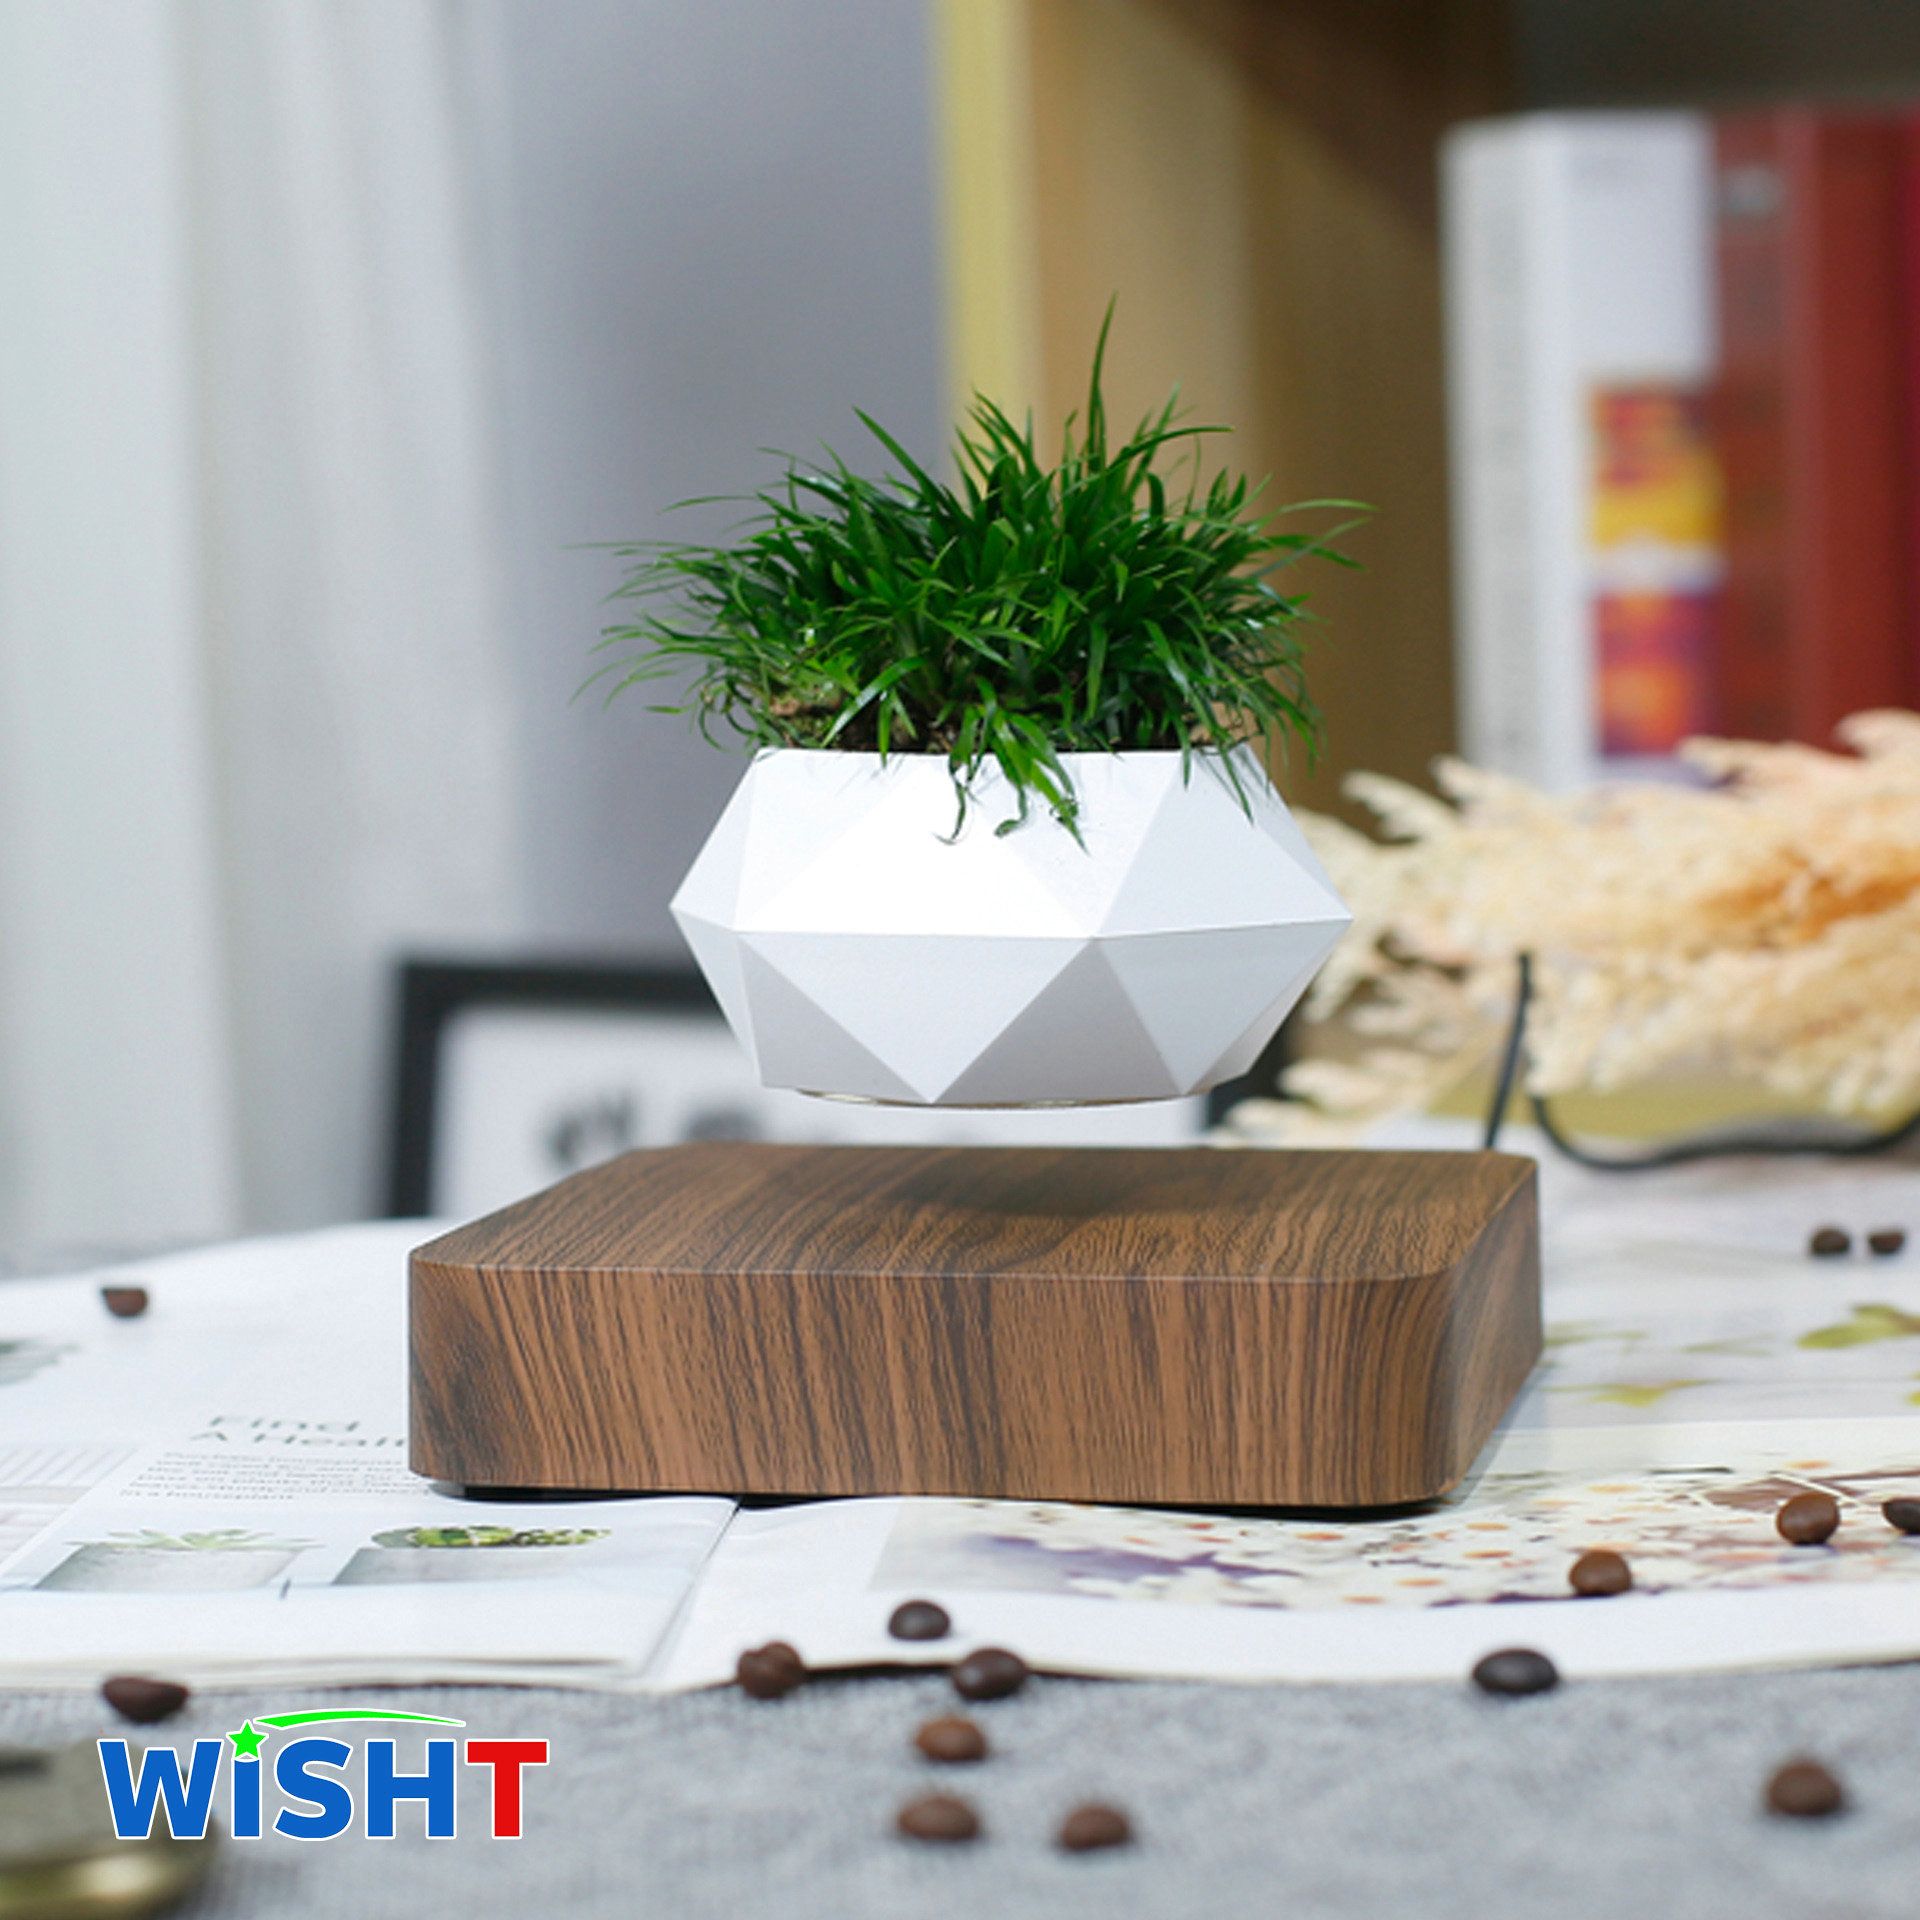  Wish magnetic levitation potted plant